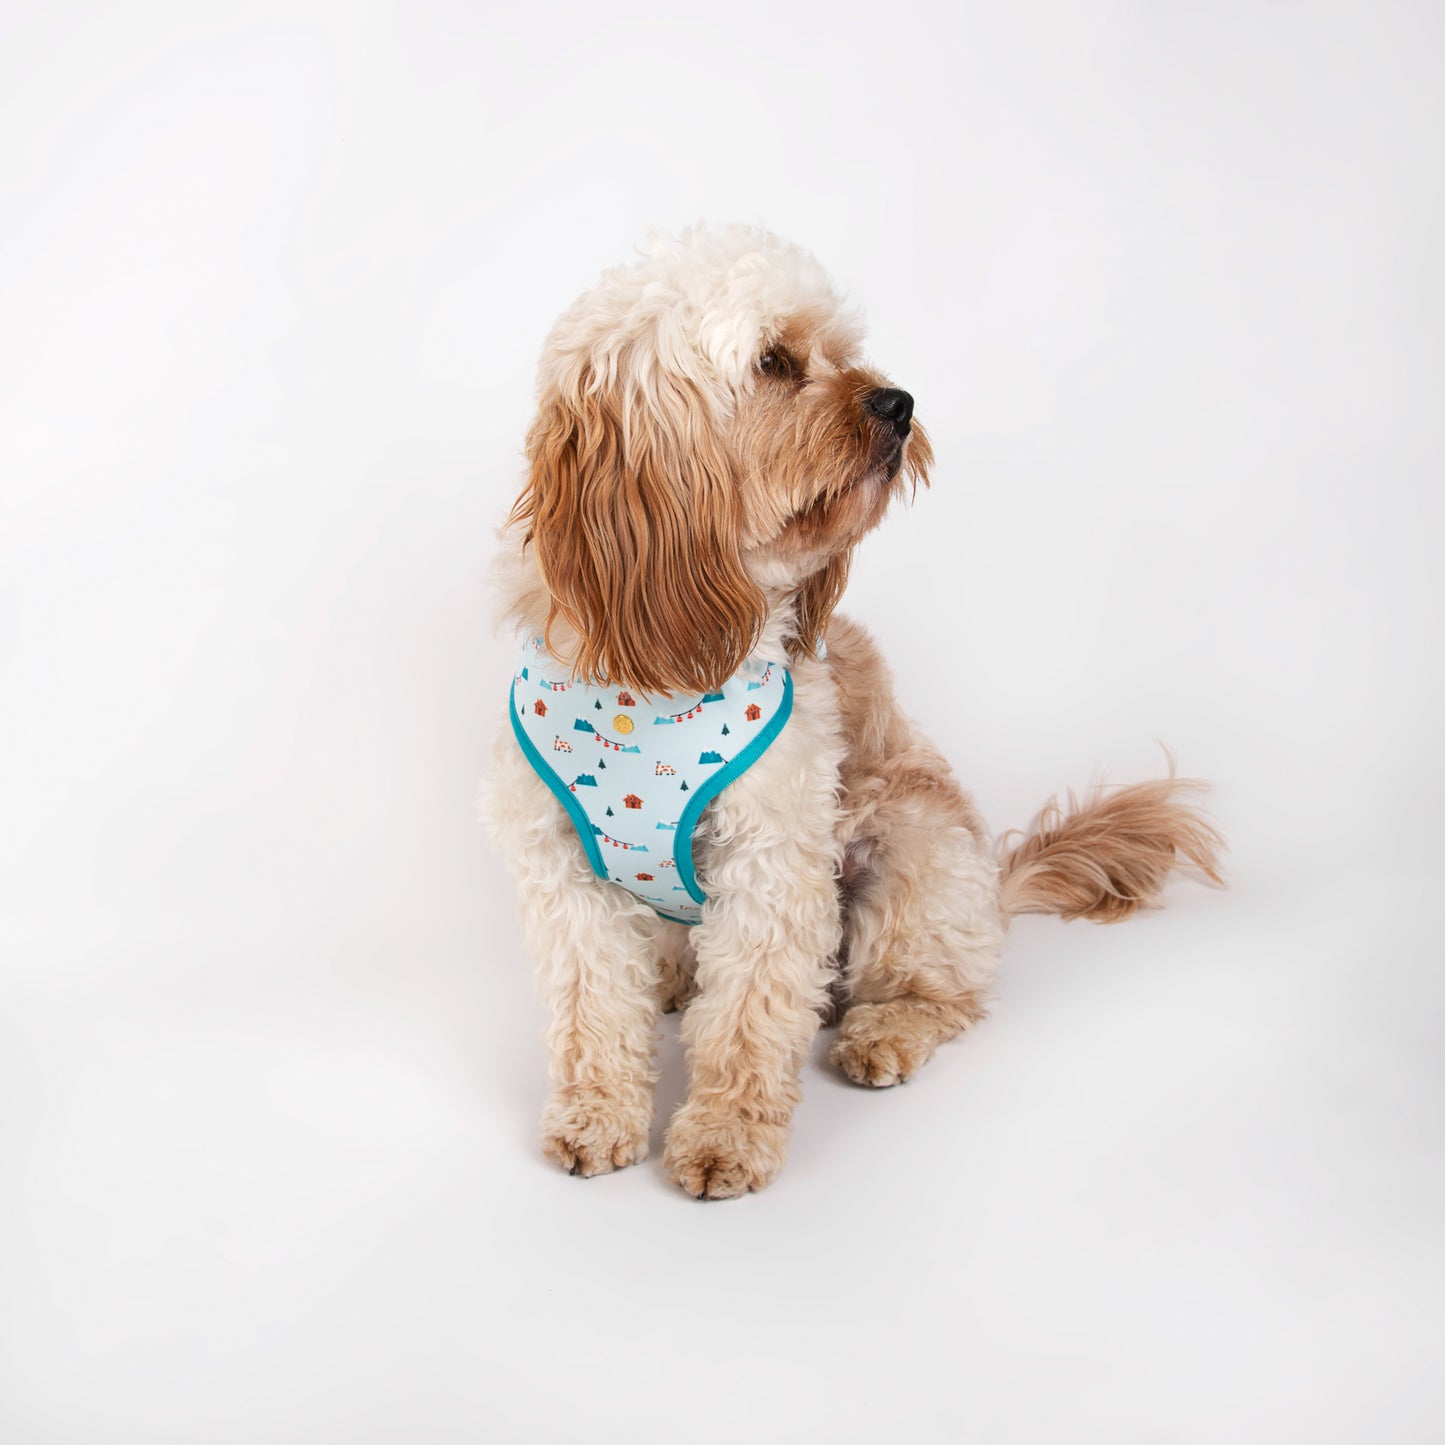 Pata Paw swiss alps harness as seen in a medium-sized dog.